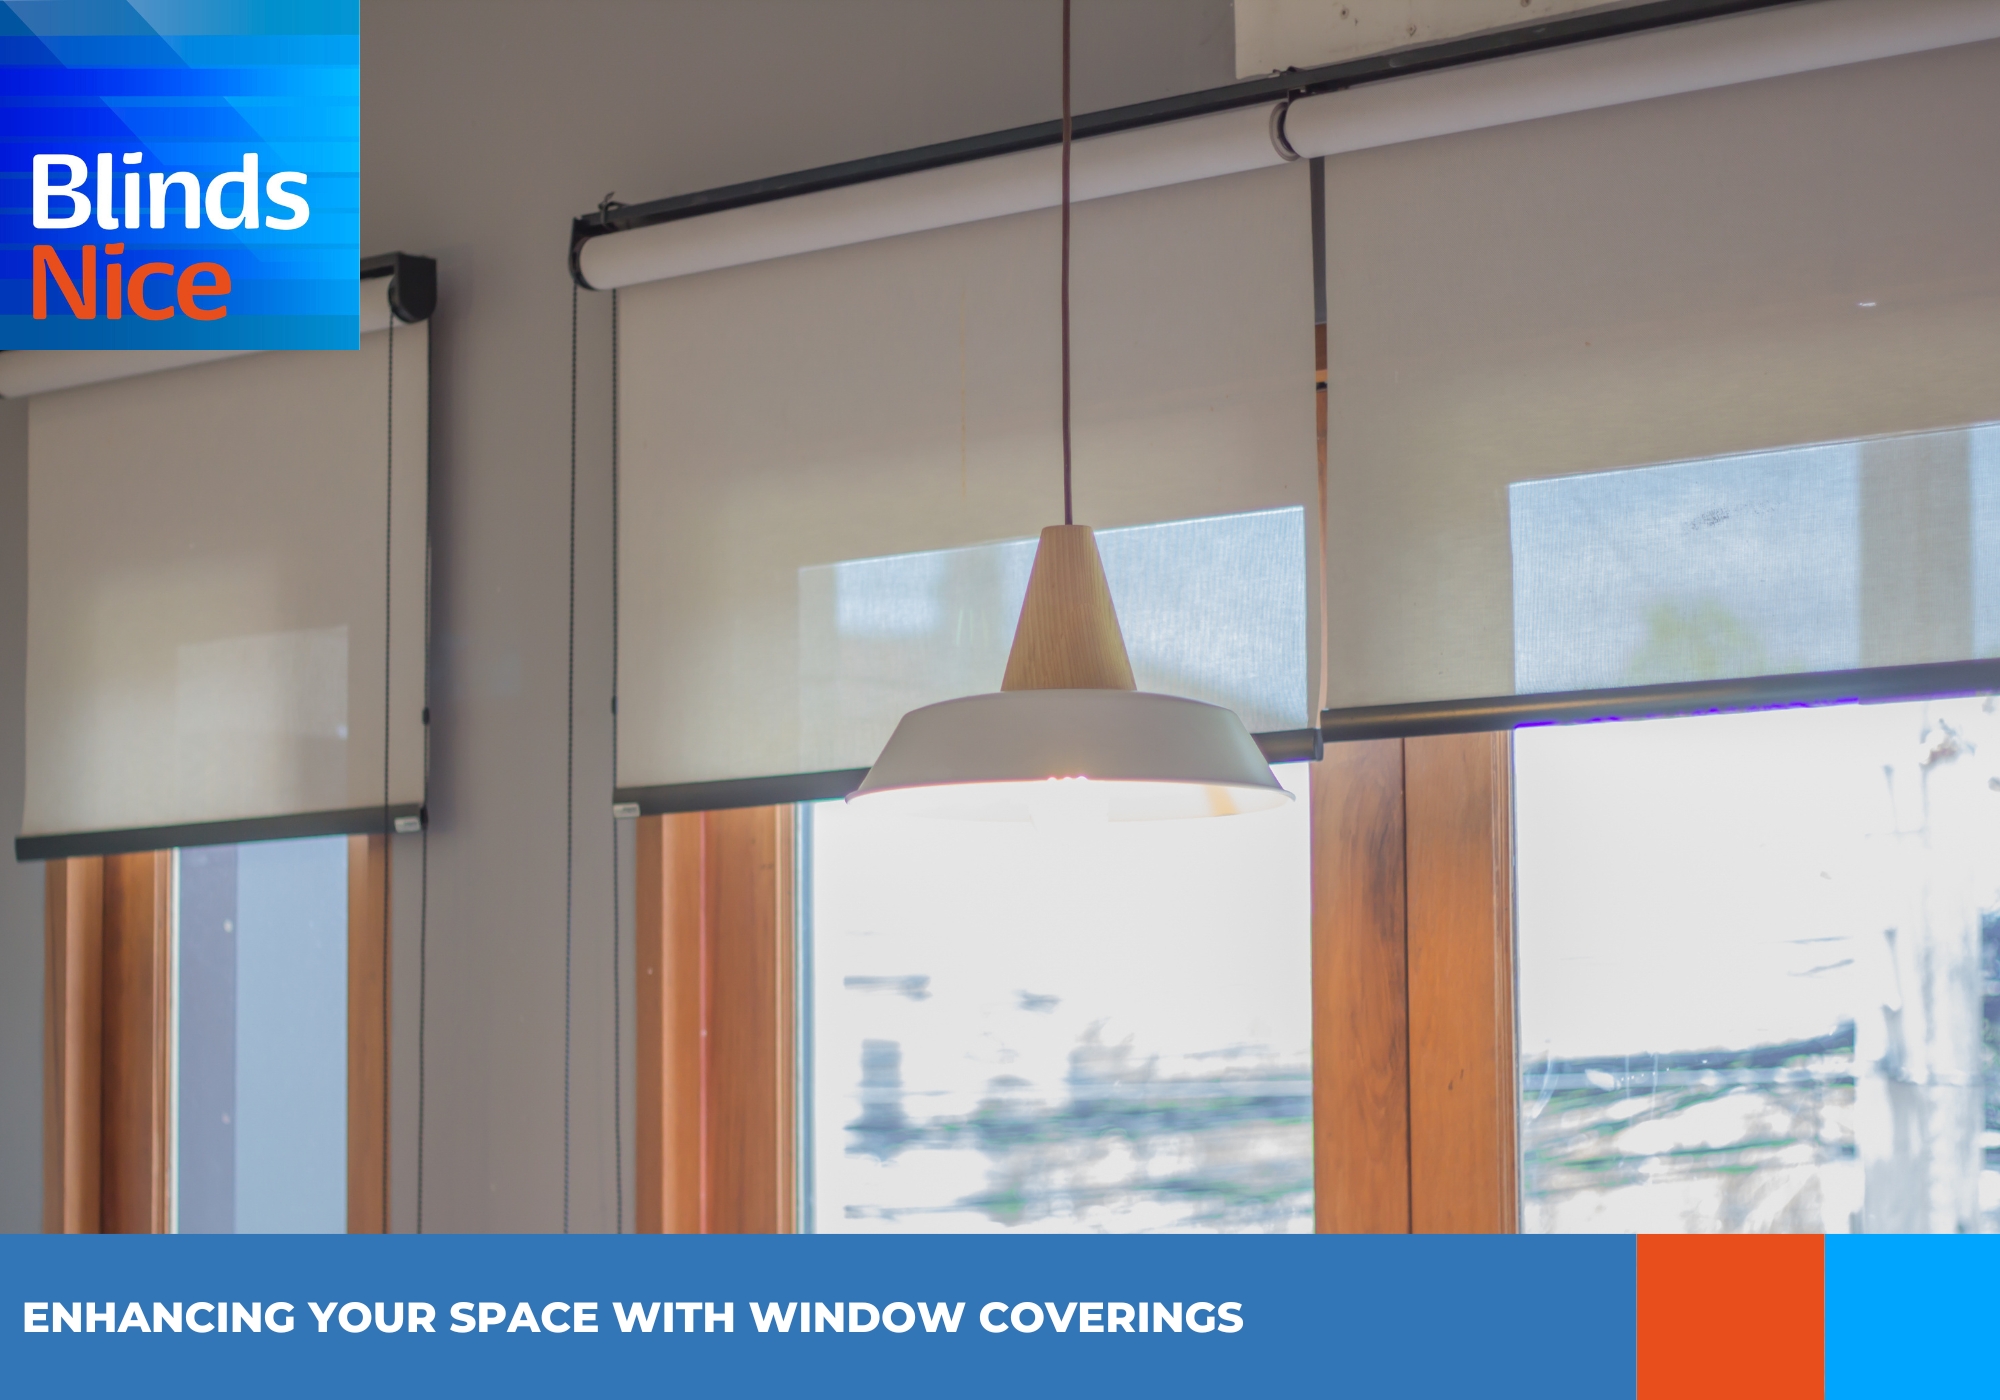 Enhancing your space with window coverings